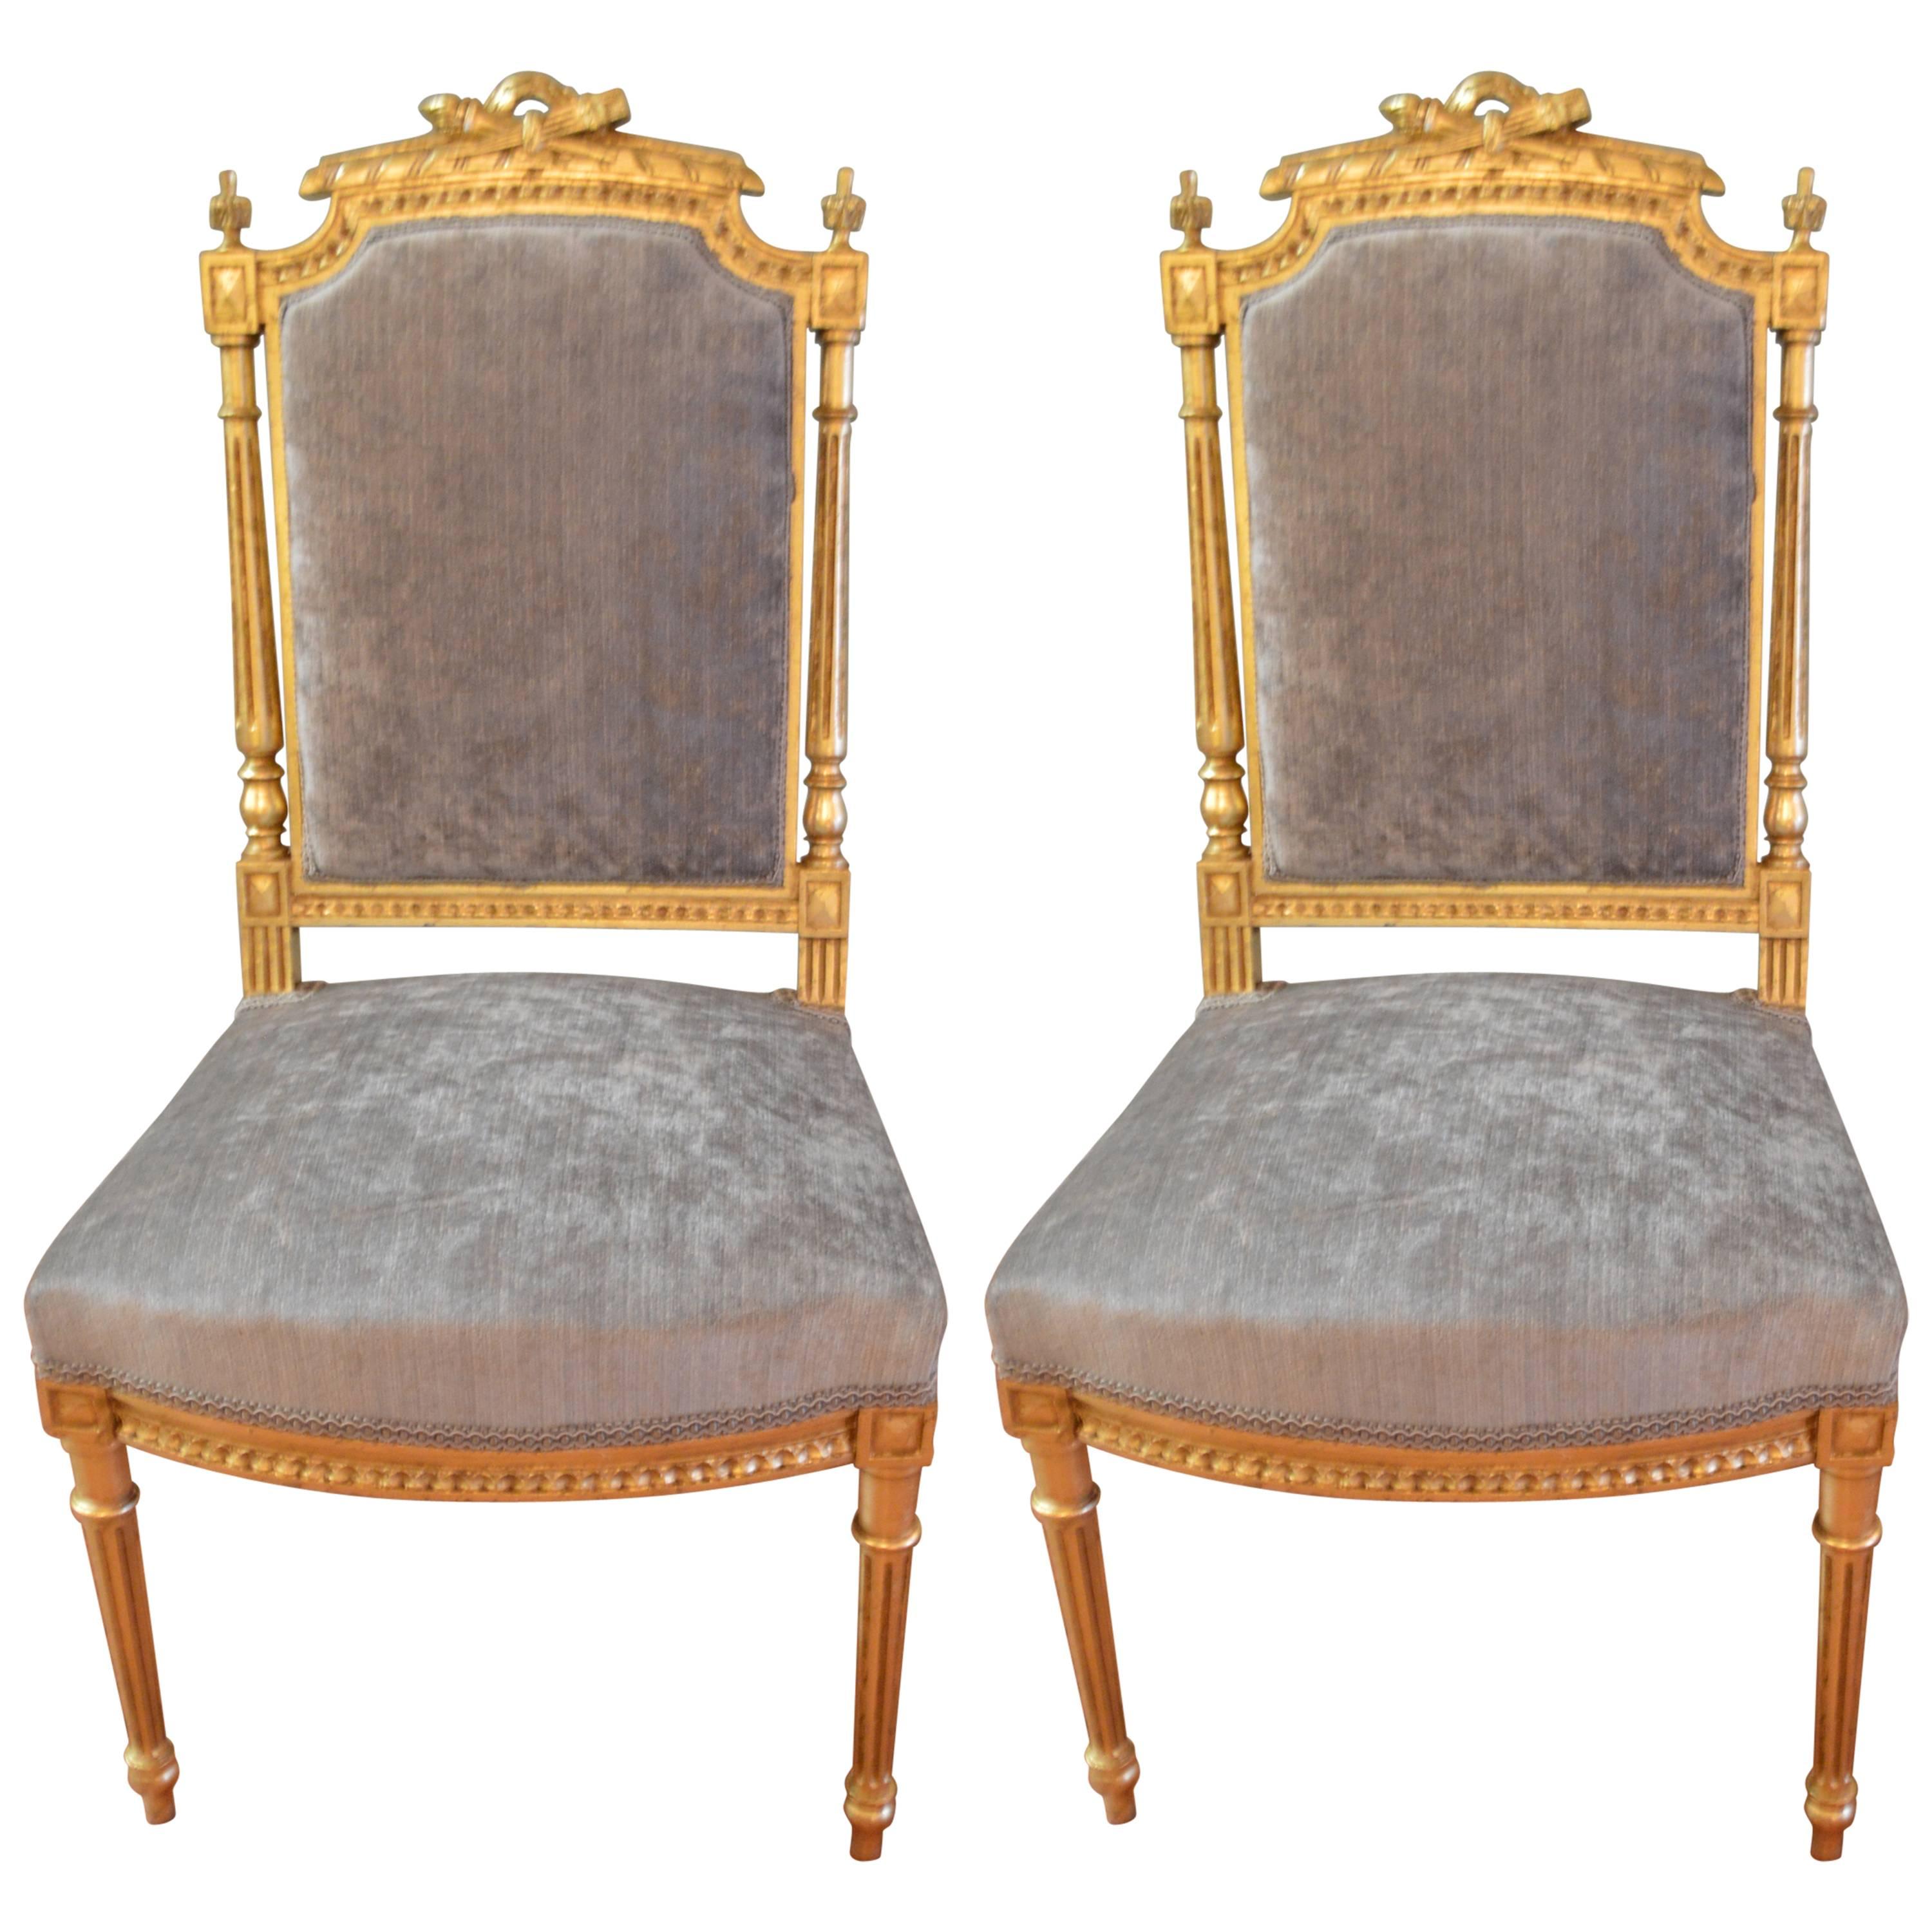 Pair of Louis XVI Style Gilded Side Chairs